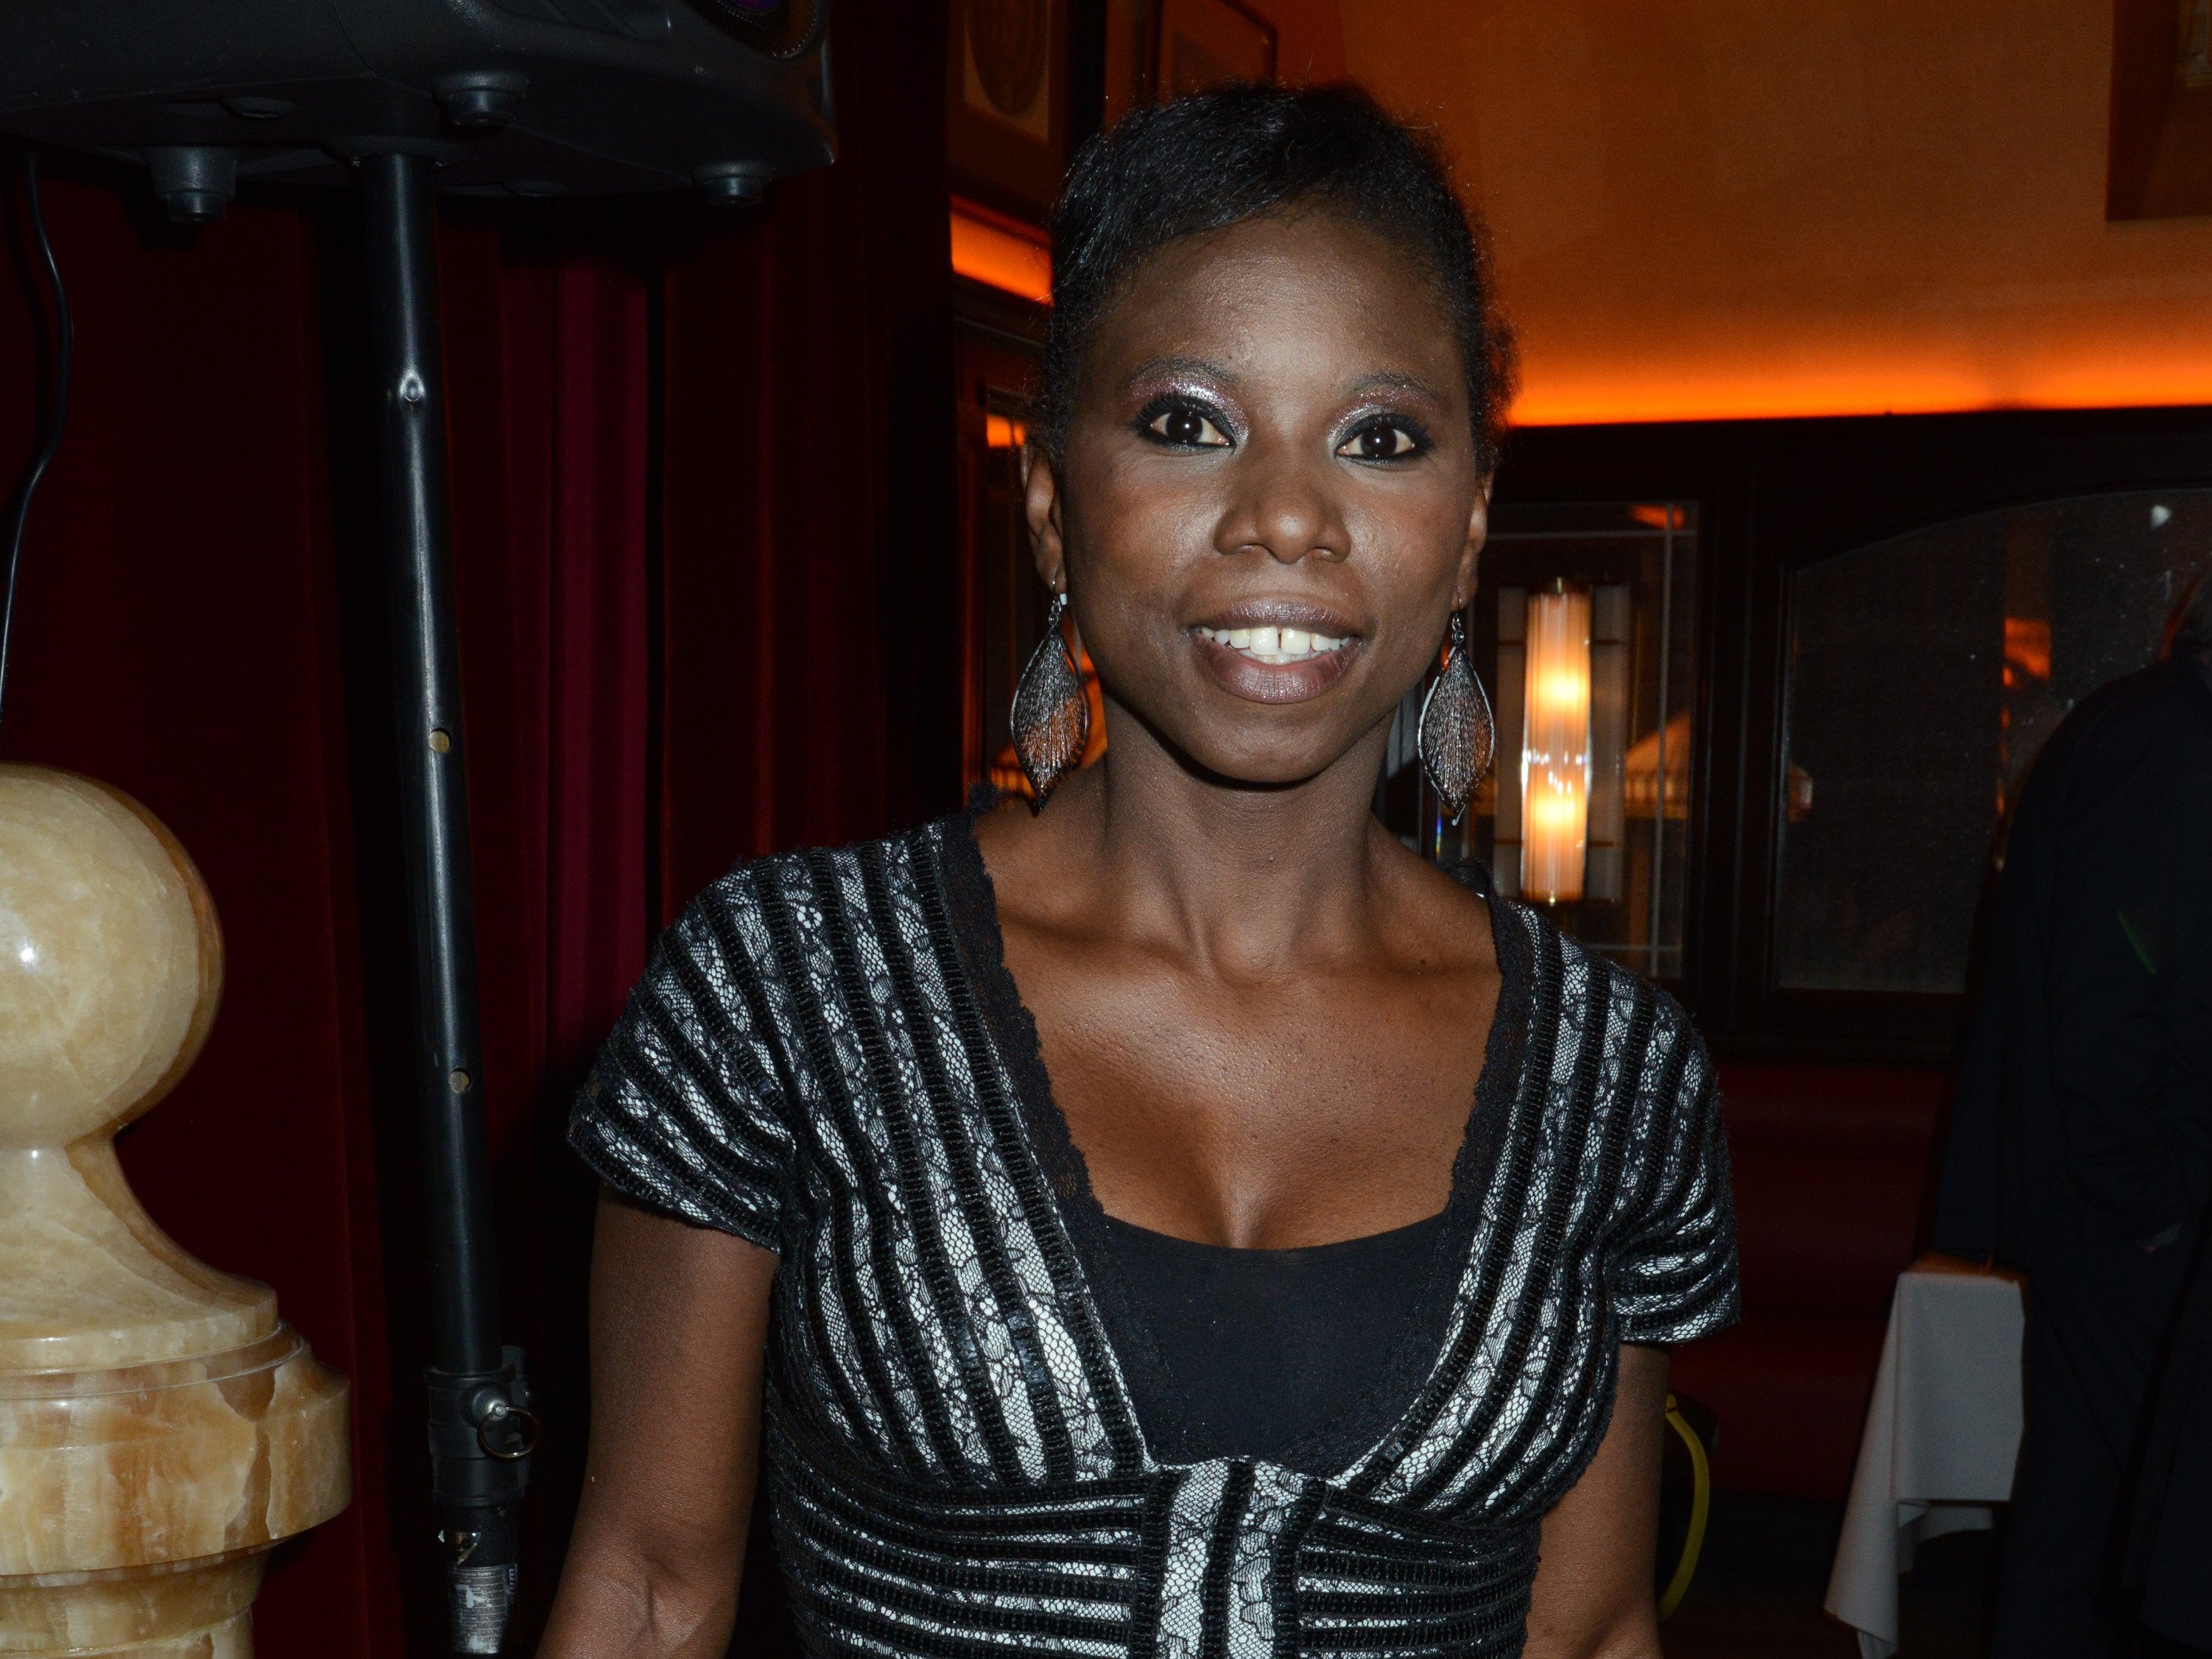  Ice skater Champion Surya Bonaly attends the 'Bistro Chic Napoleone' Champs Elysees Opening Cocktail on November 6, 2013 | Photo: Getty Images